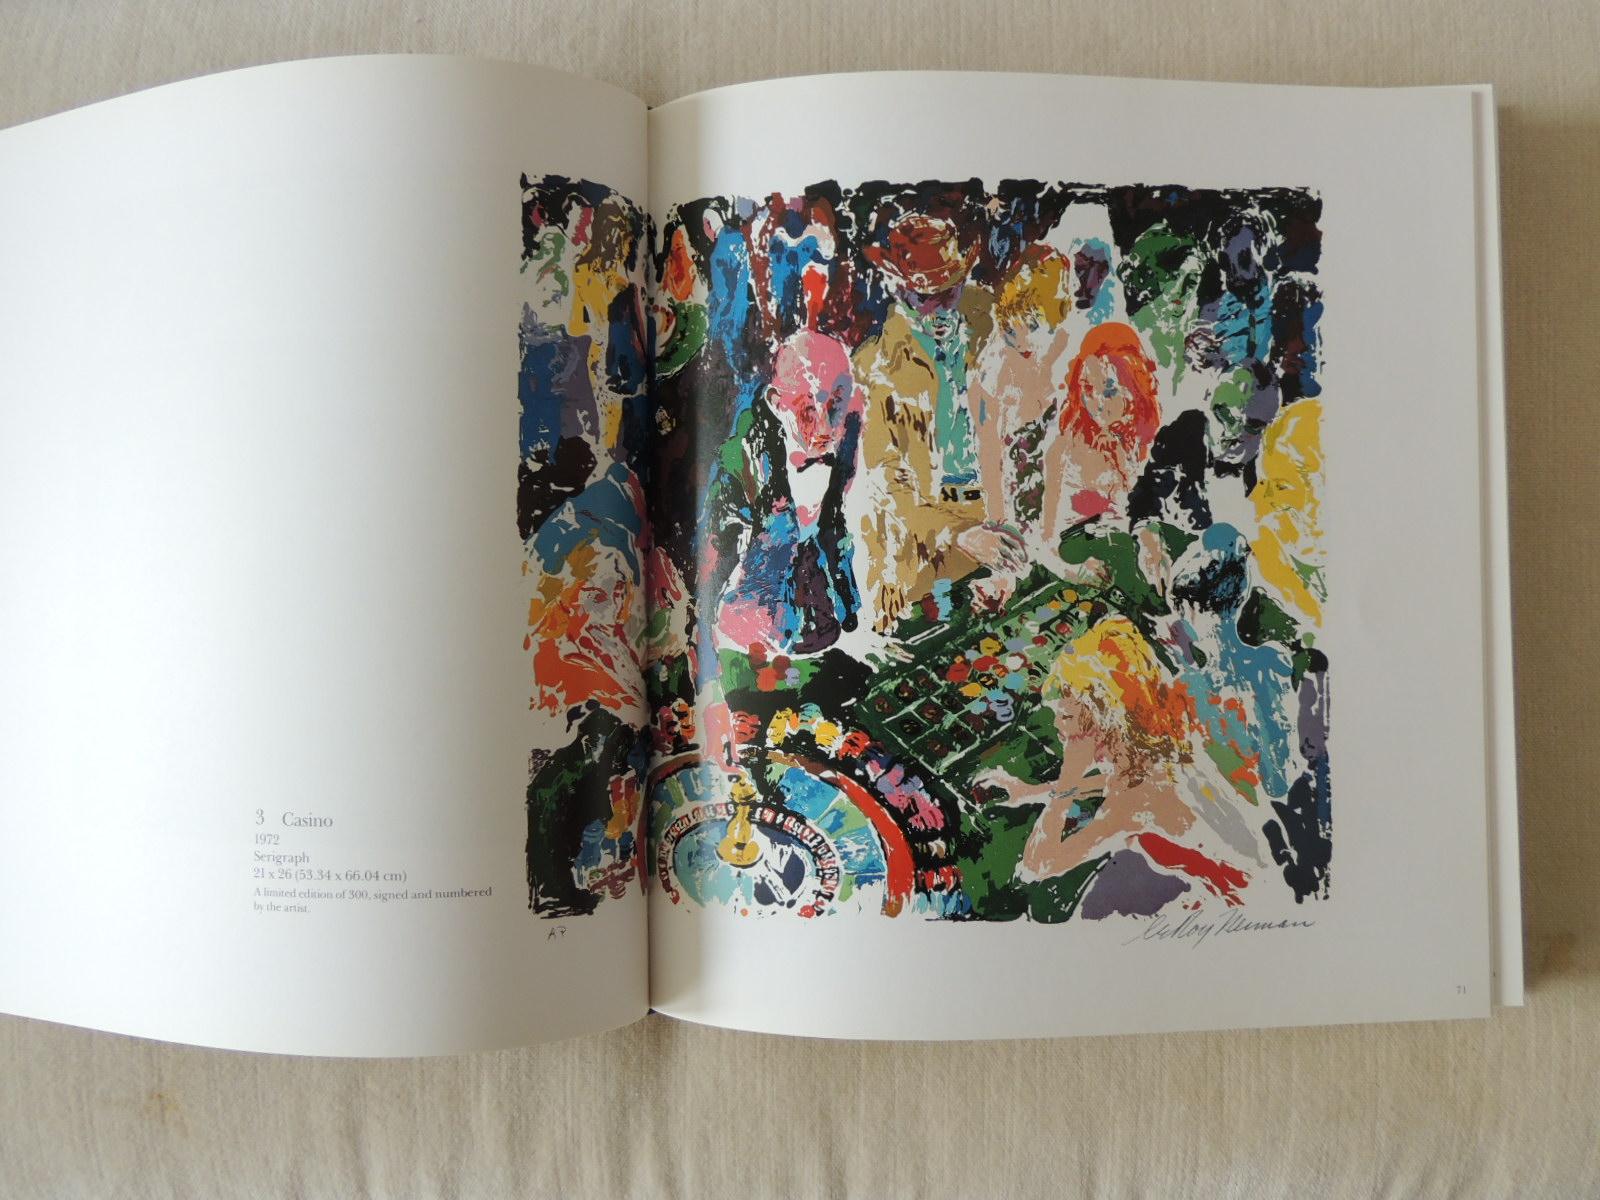 The Prints of LeRoy Neiman A Catalogue Raisonné hardcover coffee table book
A beautiful book. Contains more than 100 works, more than half in full color. There is also information about the author's life. Many of the prints are on sports, including